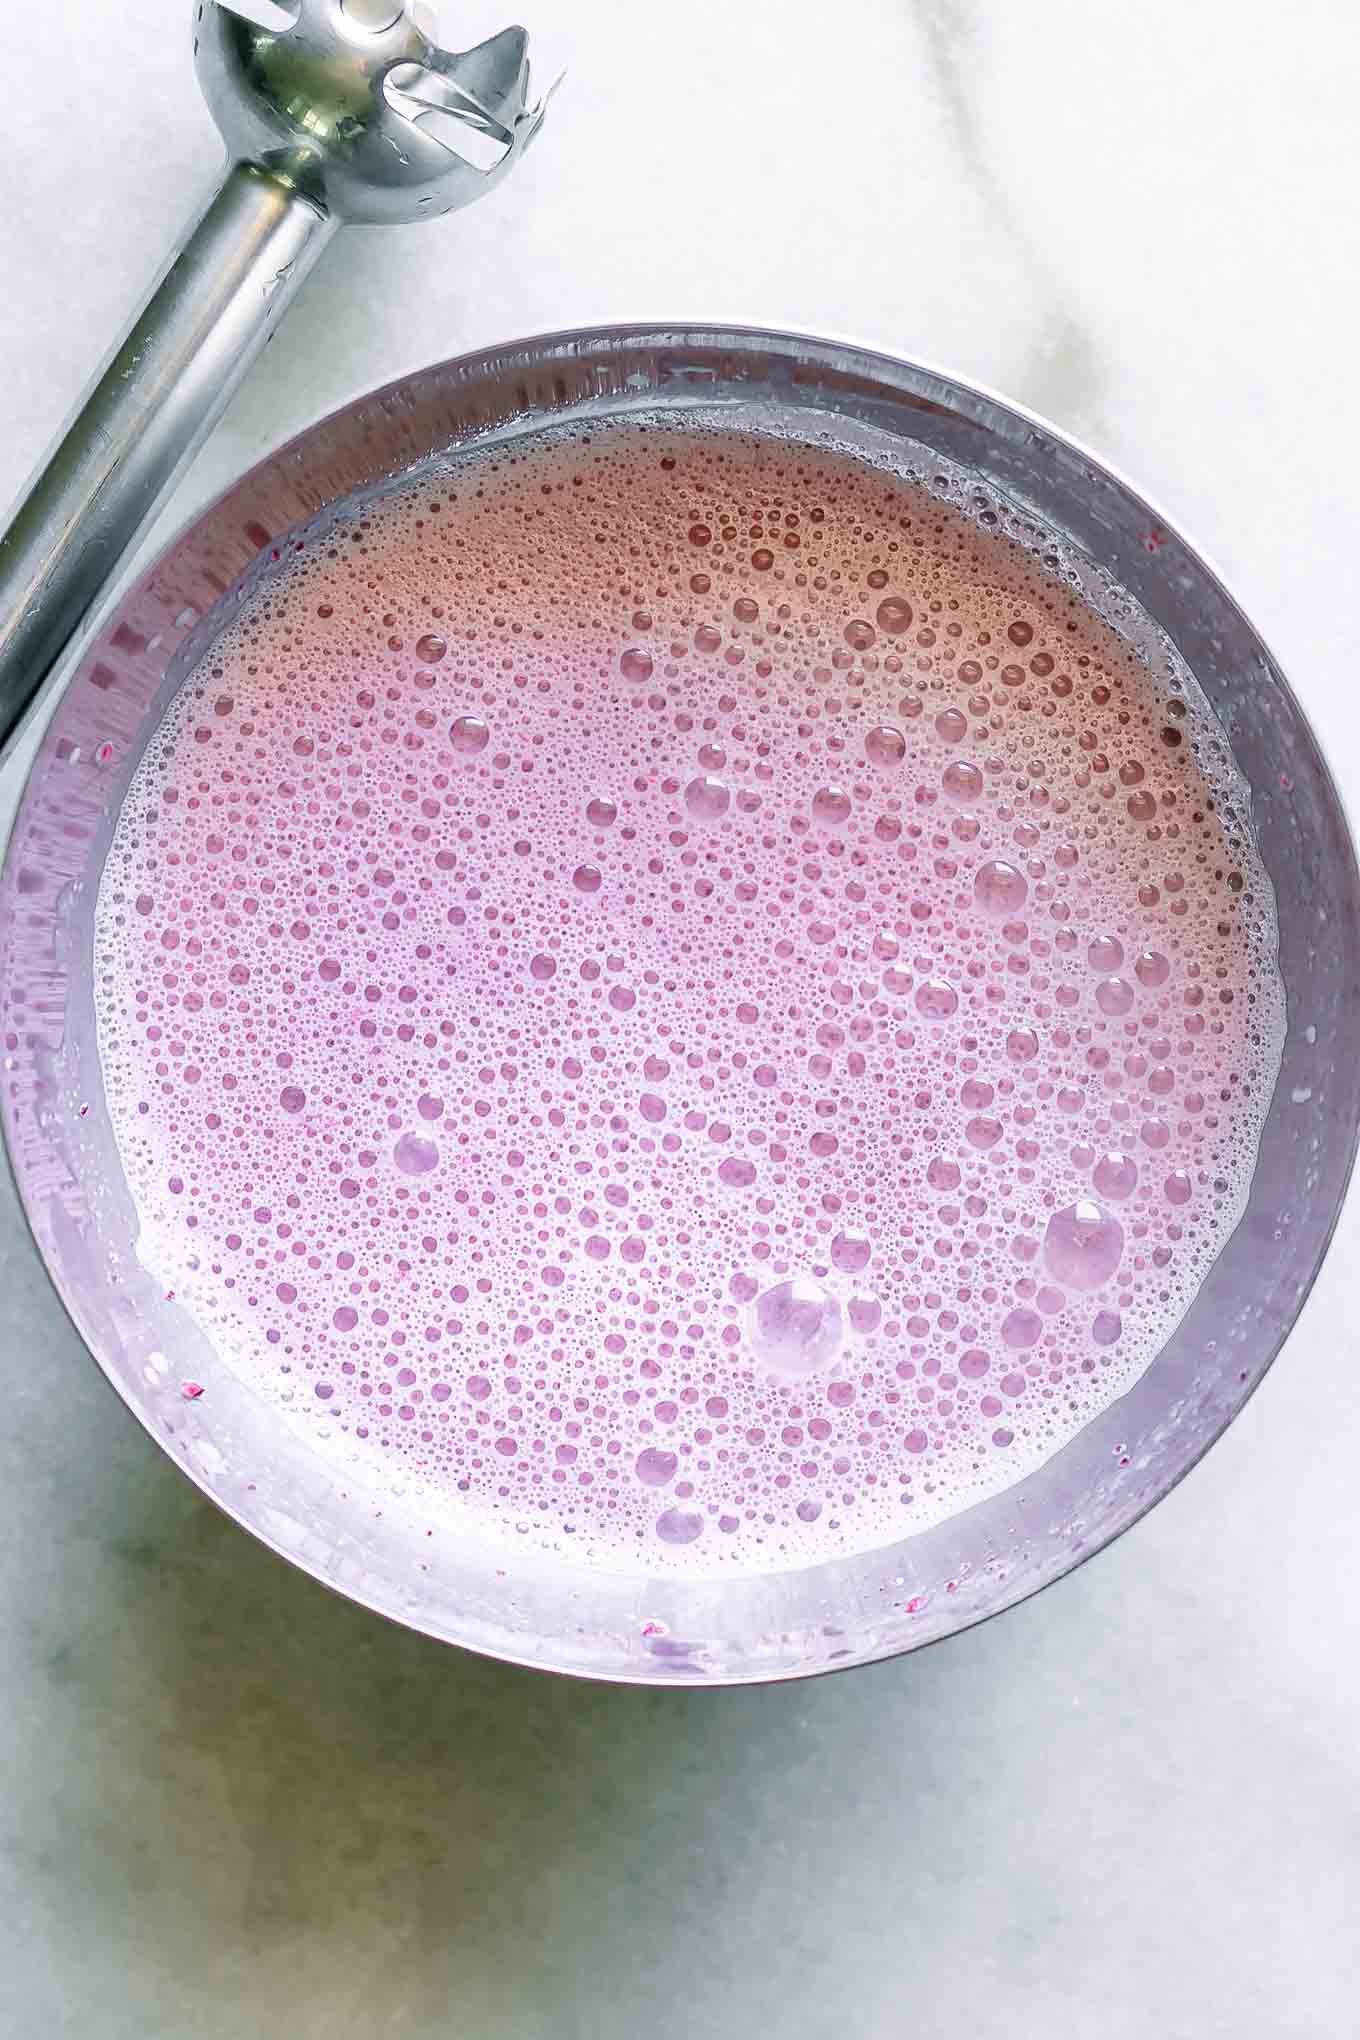 a bowl of purple plum-flavored milk on a table with an immersion blender